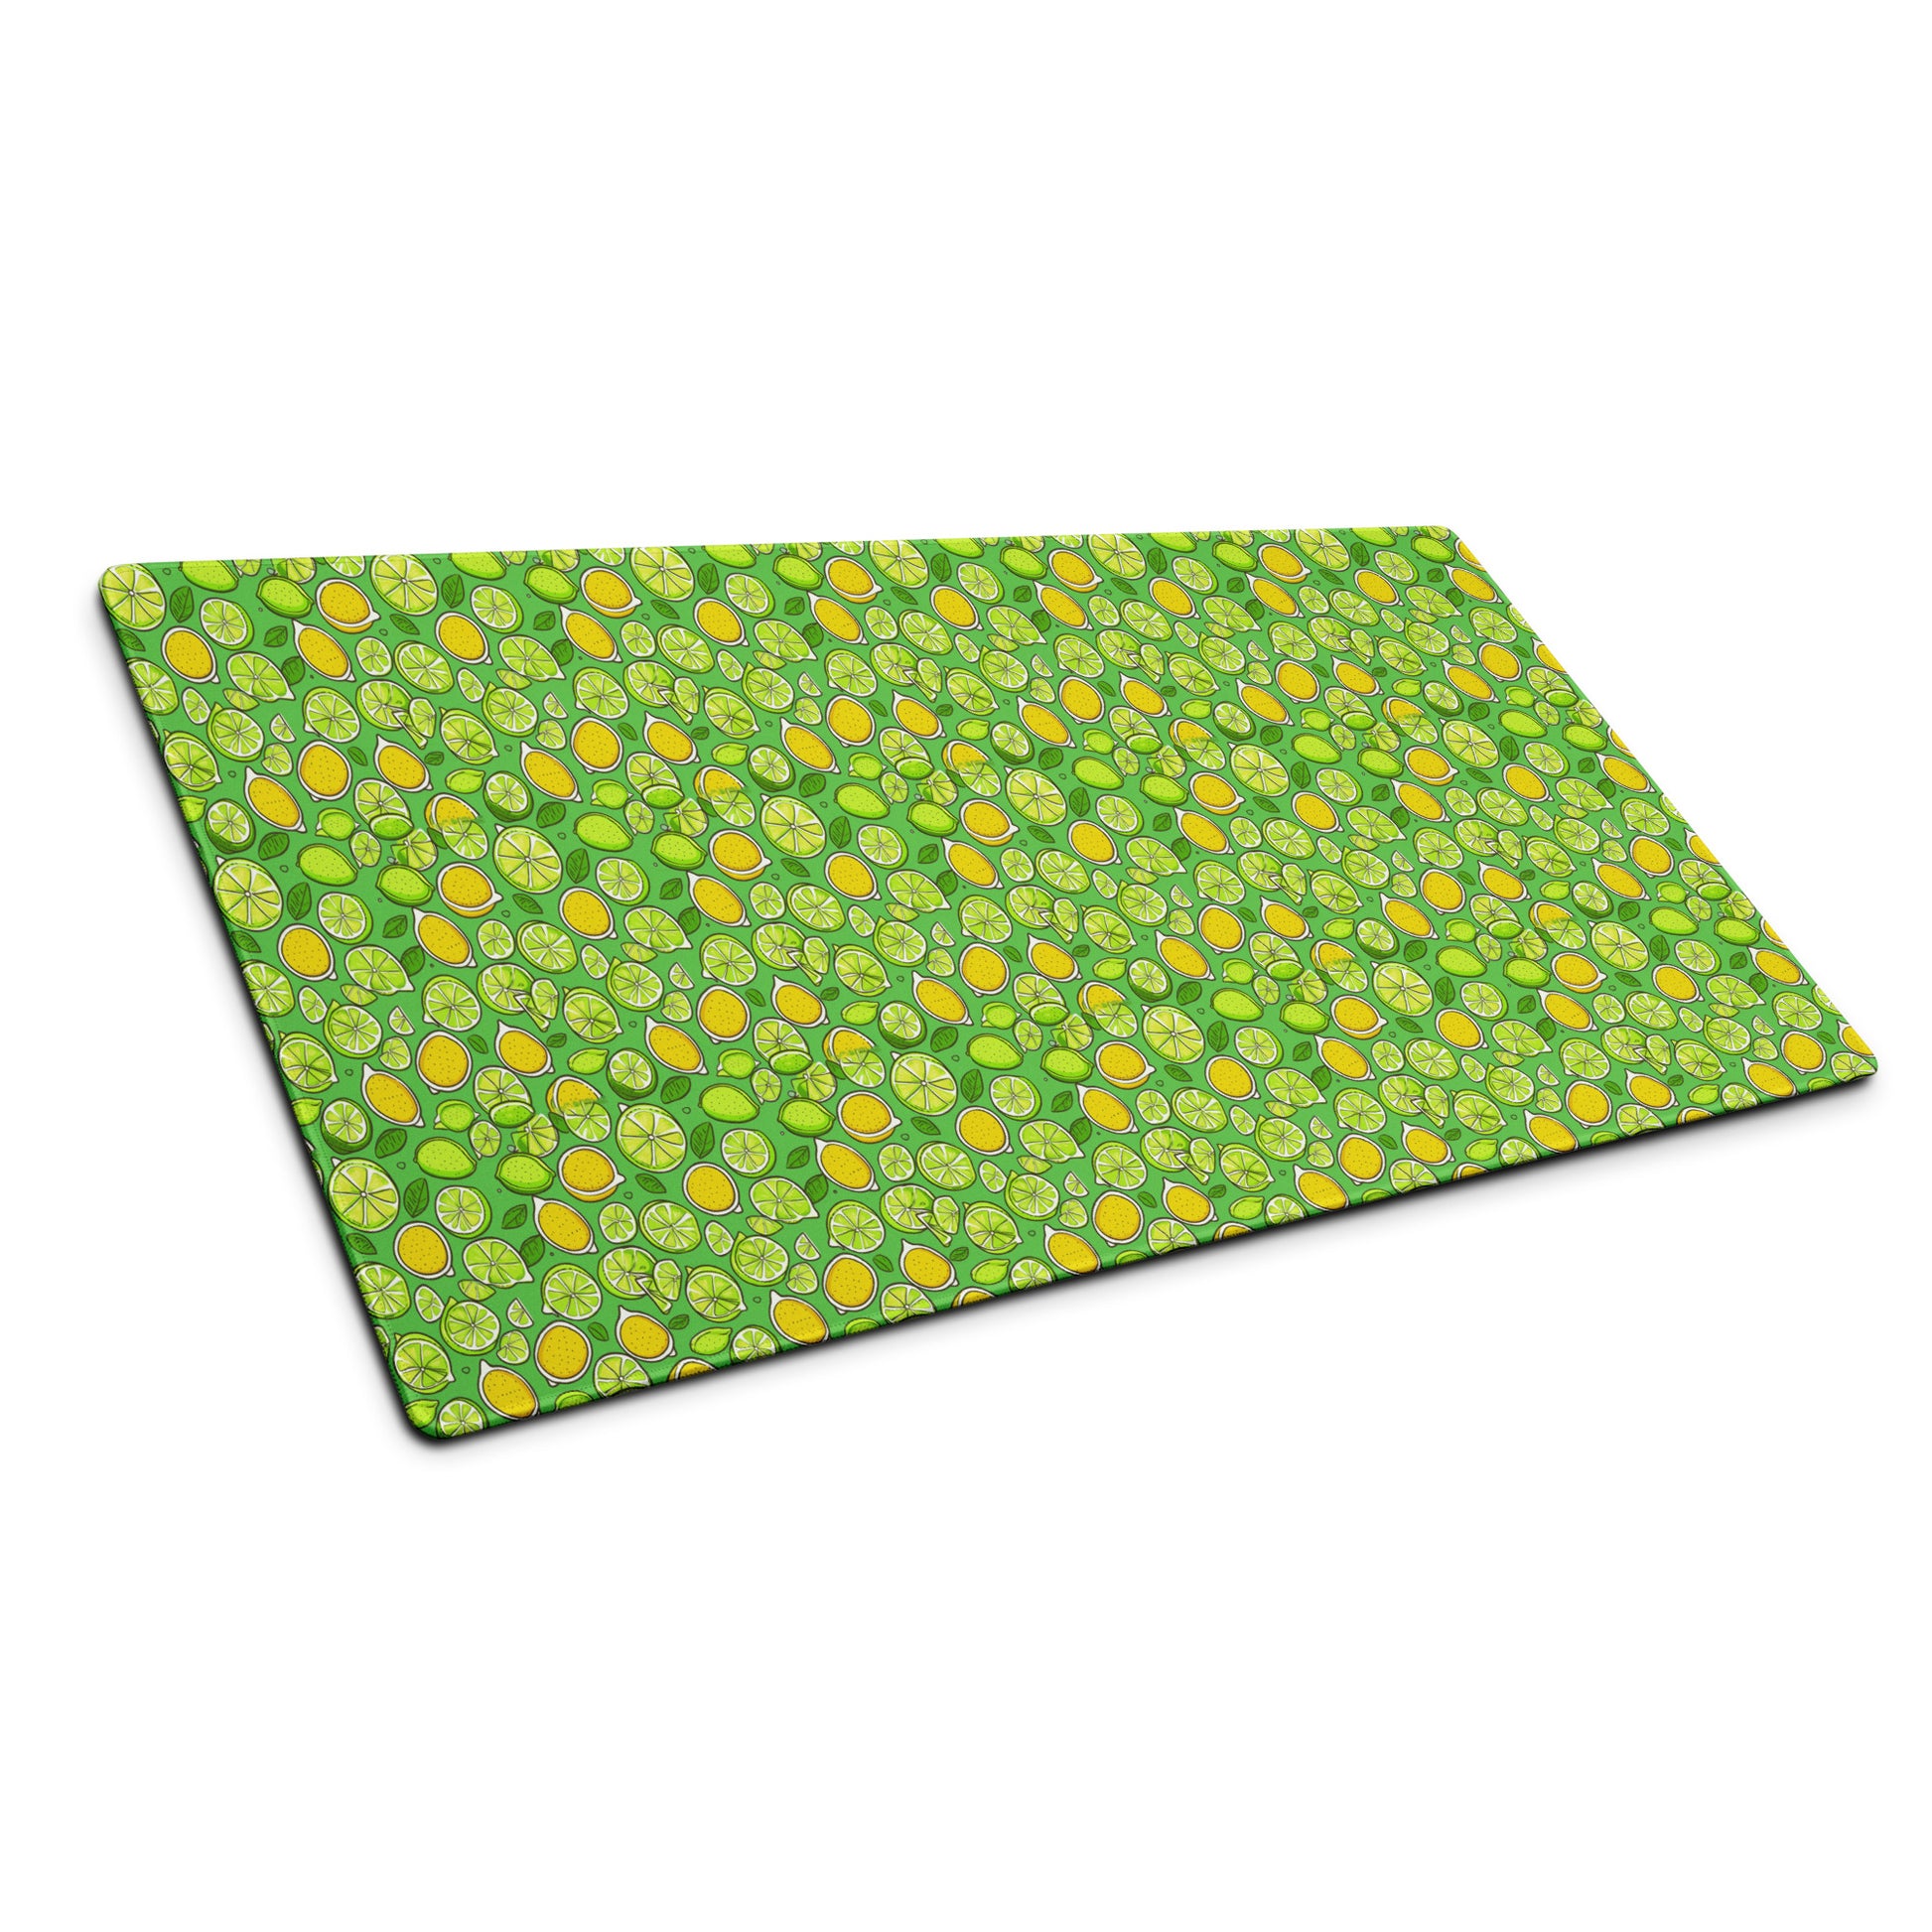 A 36" x 18" gaming desk pad with lemons and limes on a green background sitting at an angle.